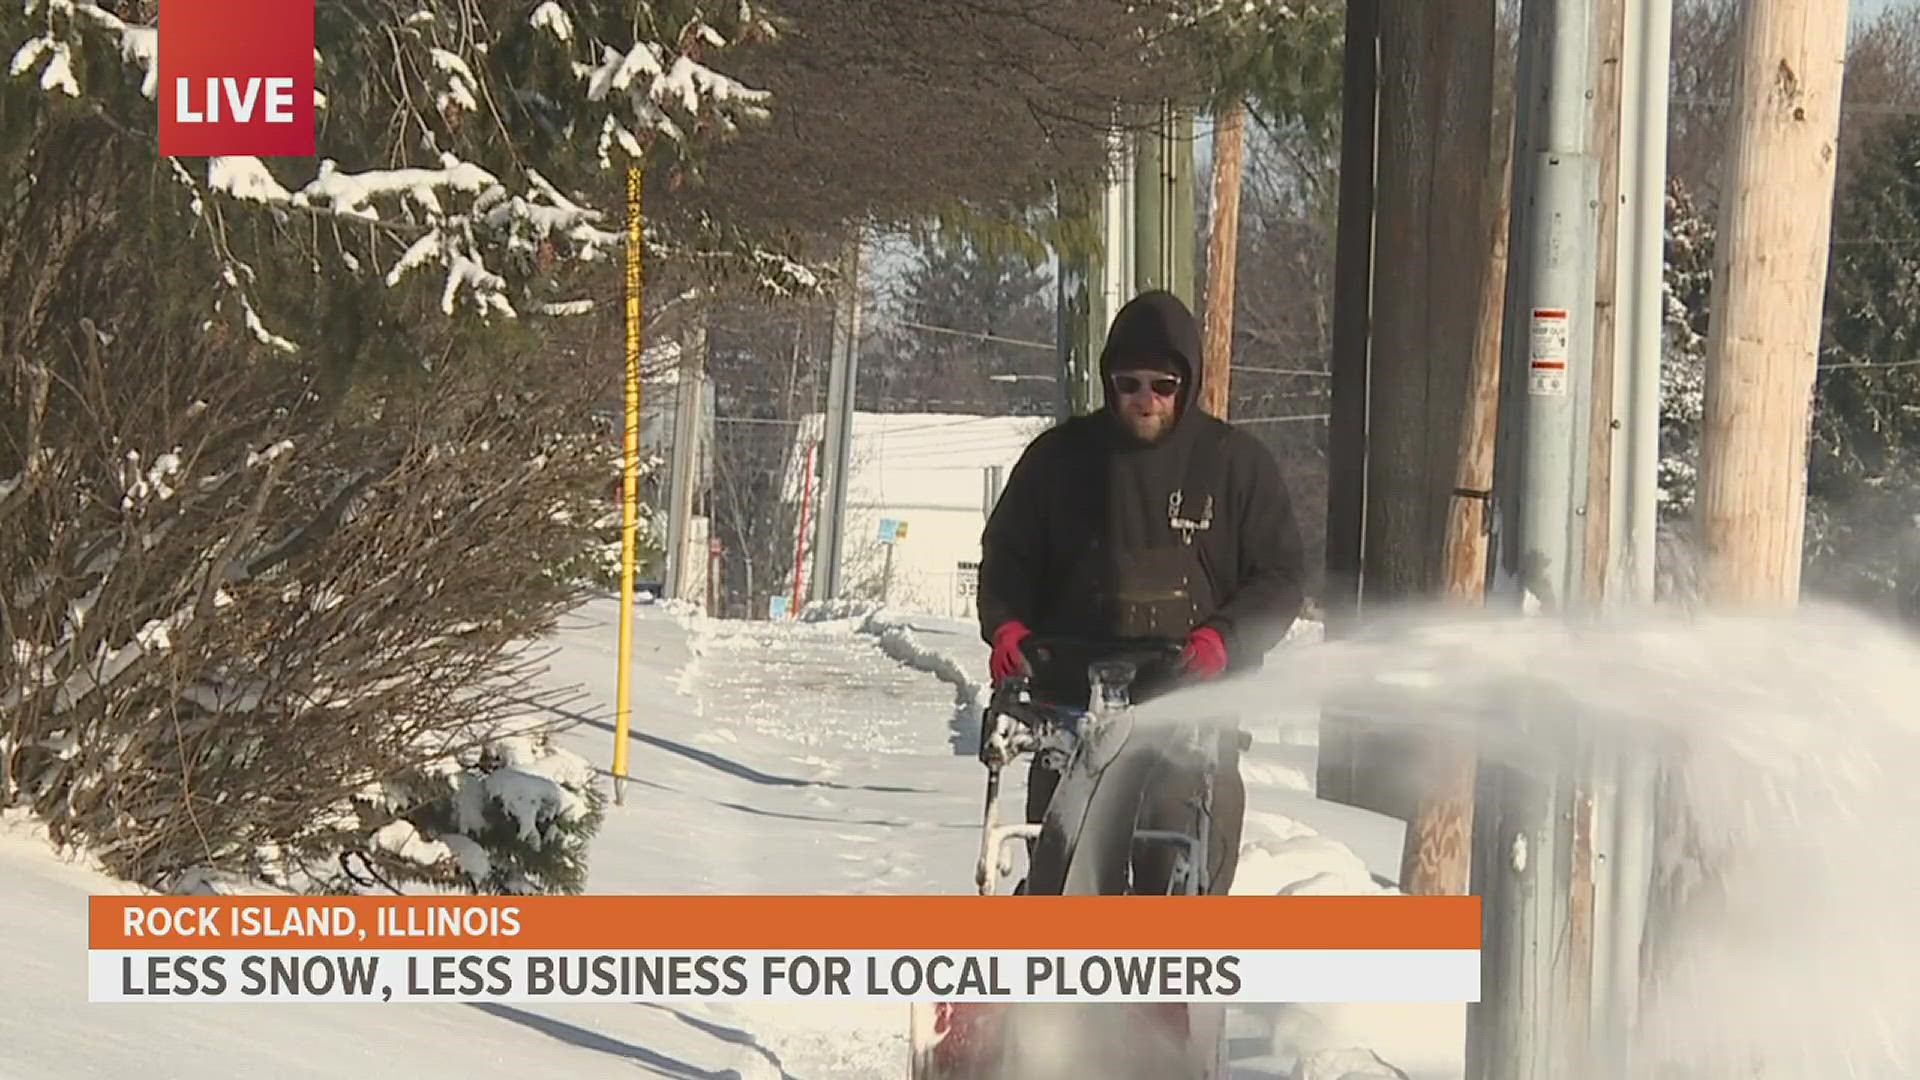 While many of us have enjoyed the warm days throughout the winter, local snow removal businesses have not.